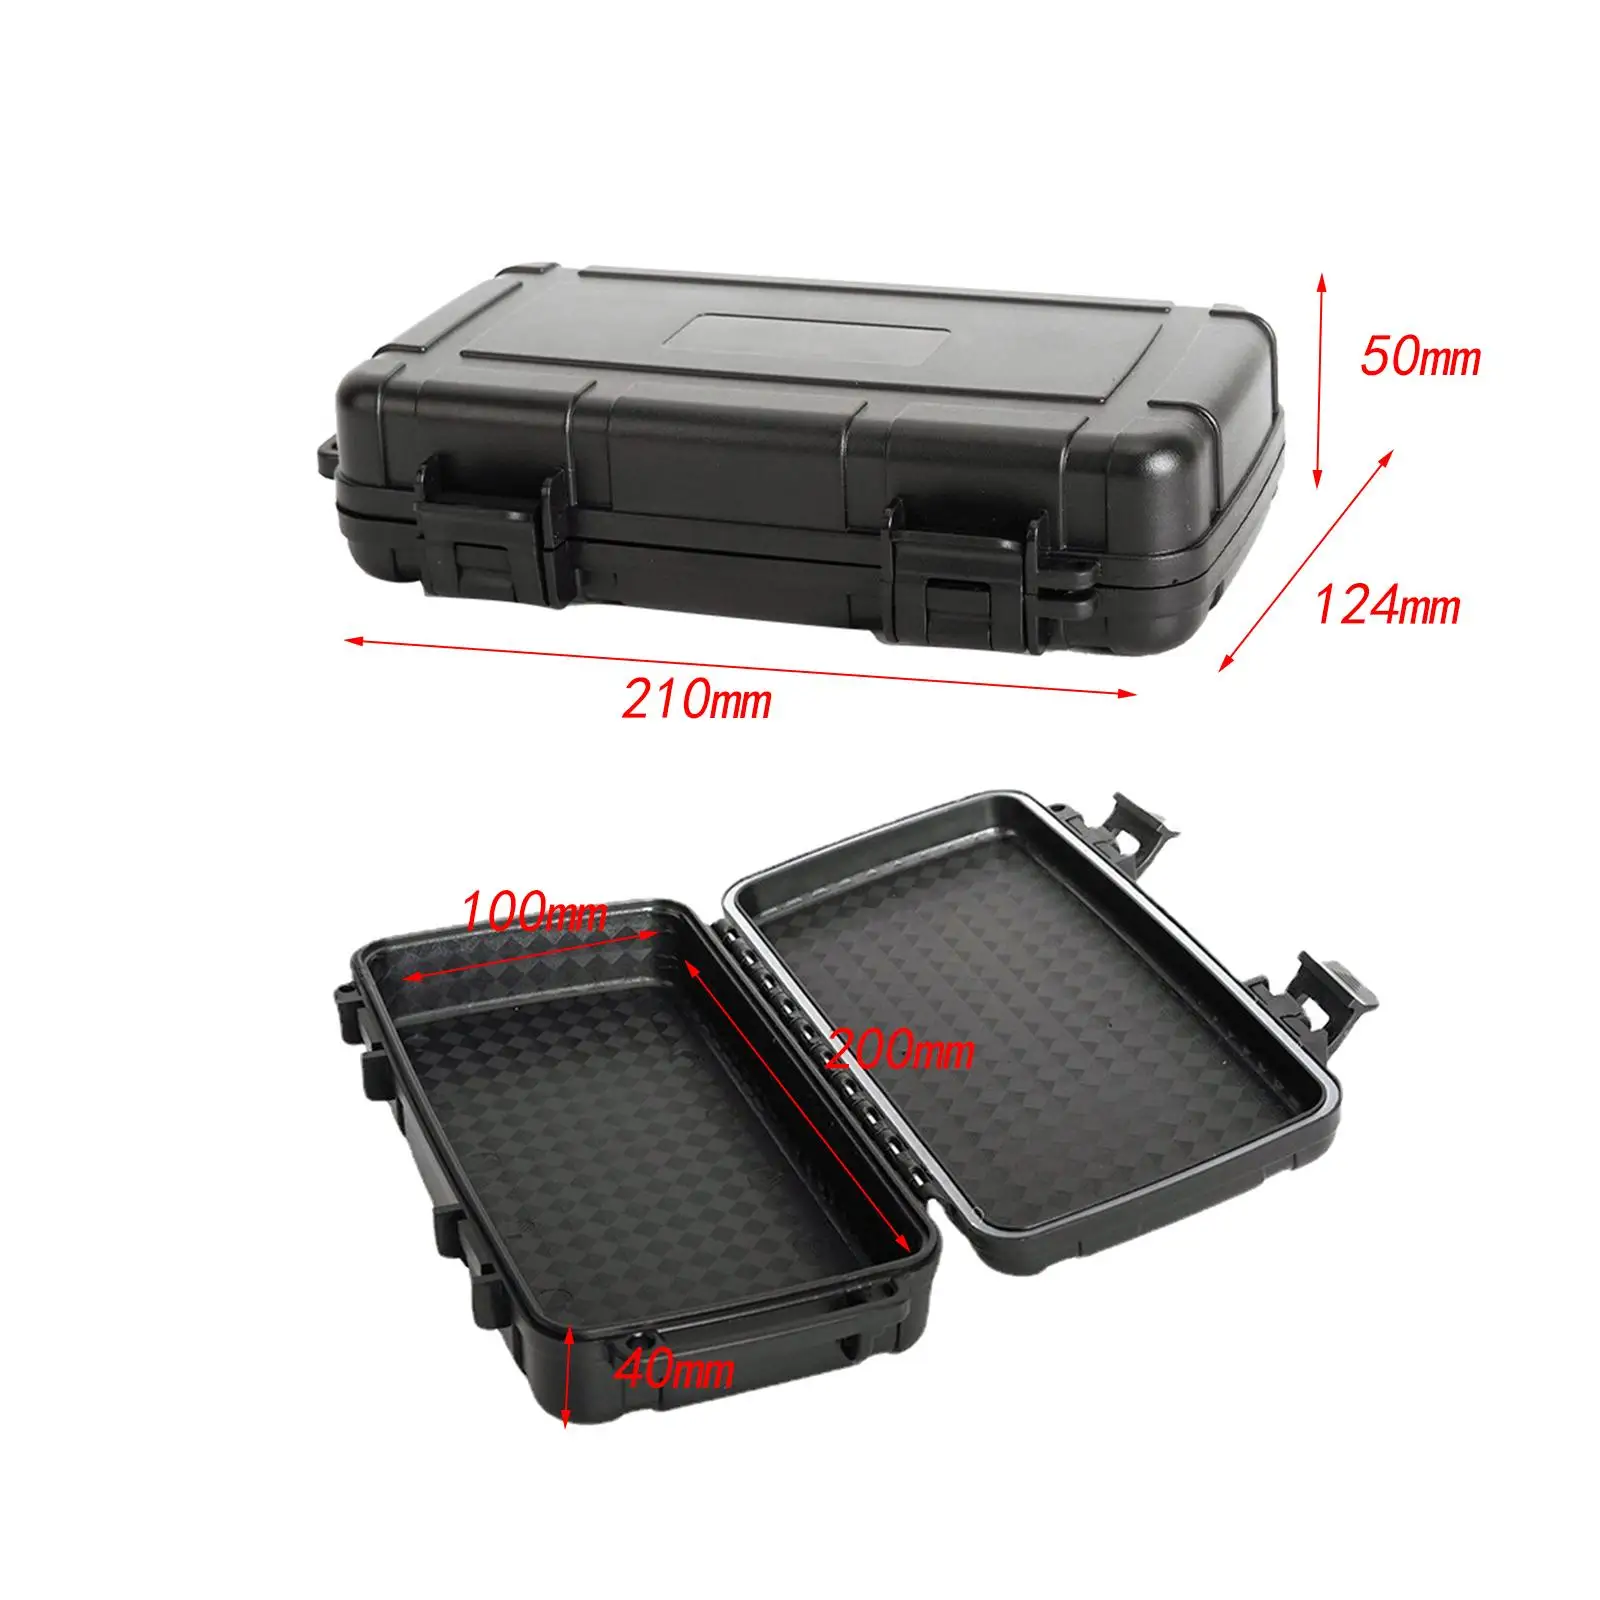 Tool Case Storage Box with Sponge Compact Protection Equipment Sealed Carrying Case for Instrument Garage Warehouse Storage